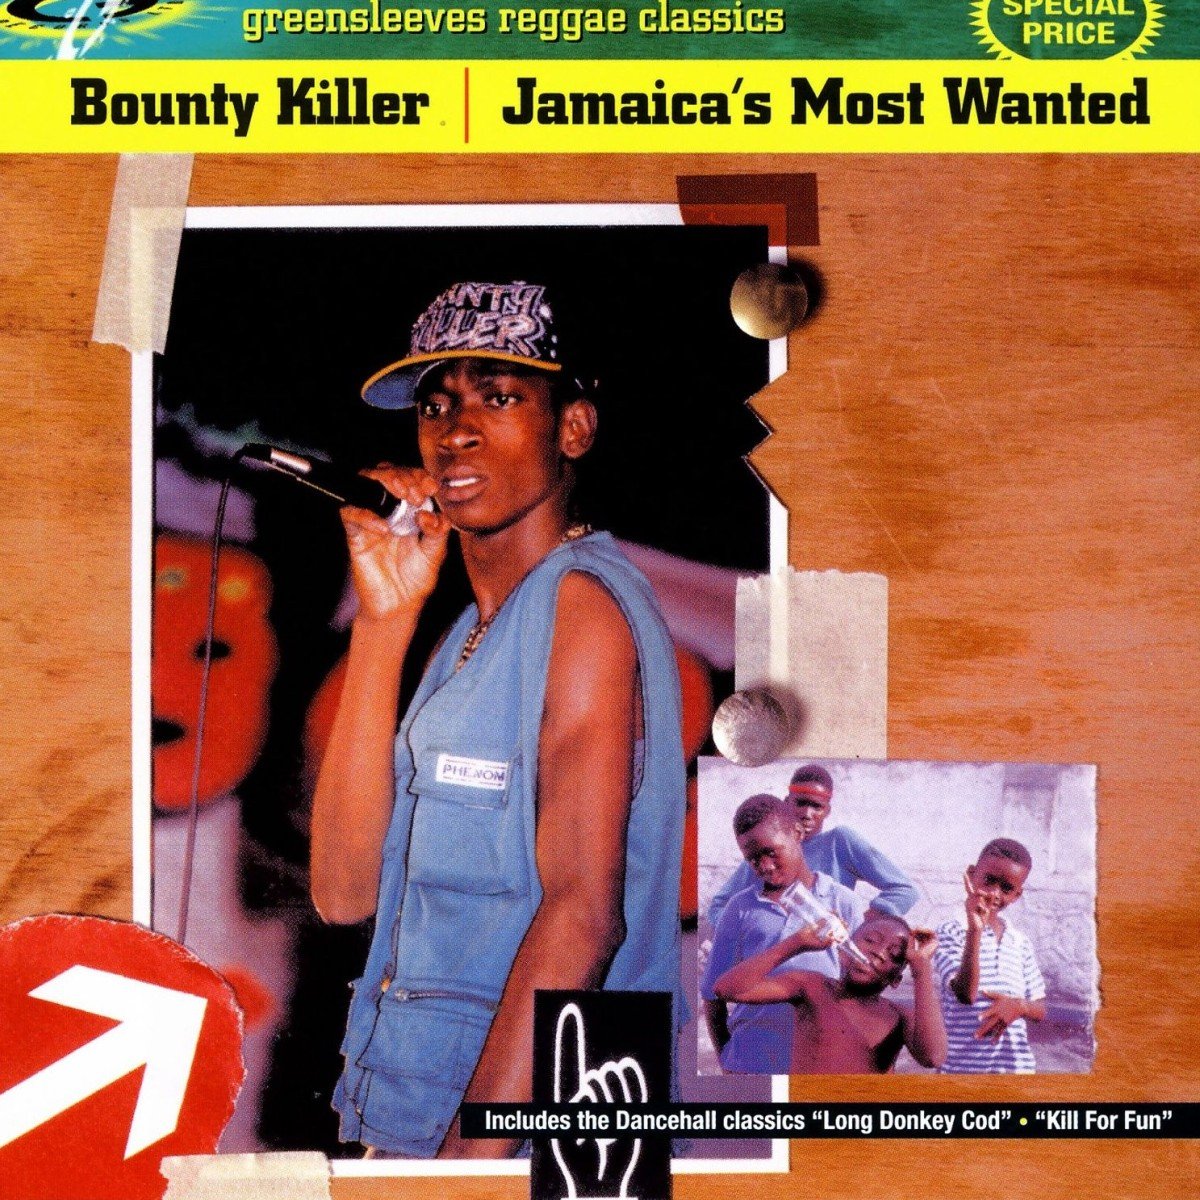 When Garnett Silk And Luciano Refused To Perform With Bounty Killer